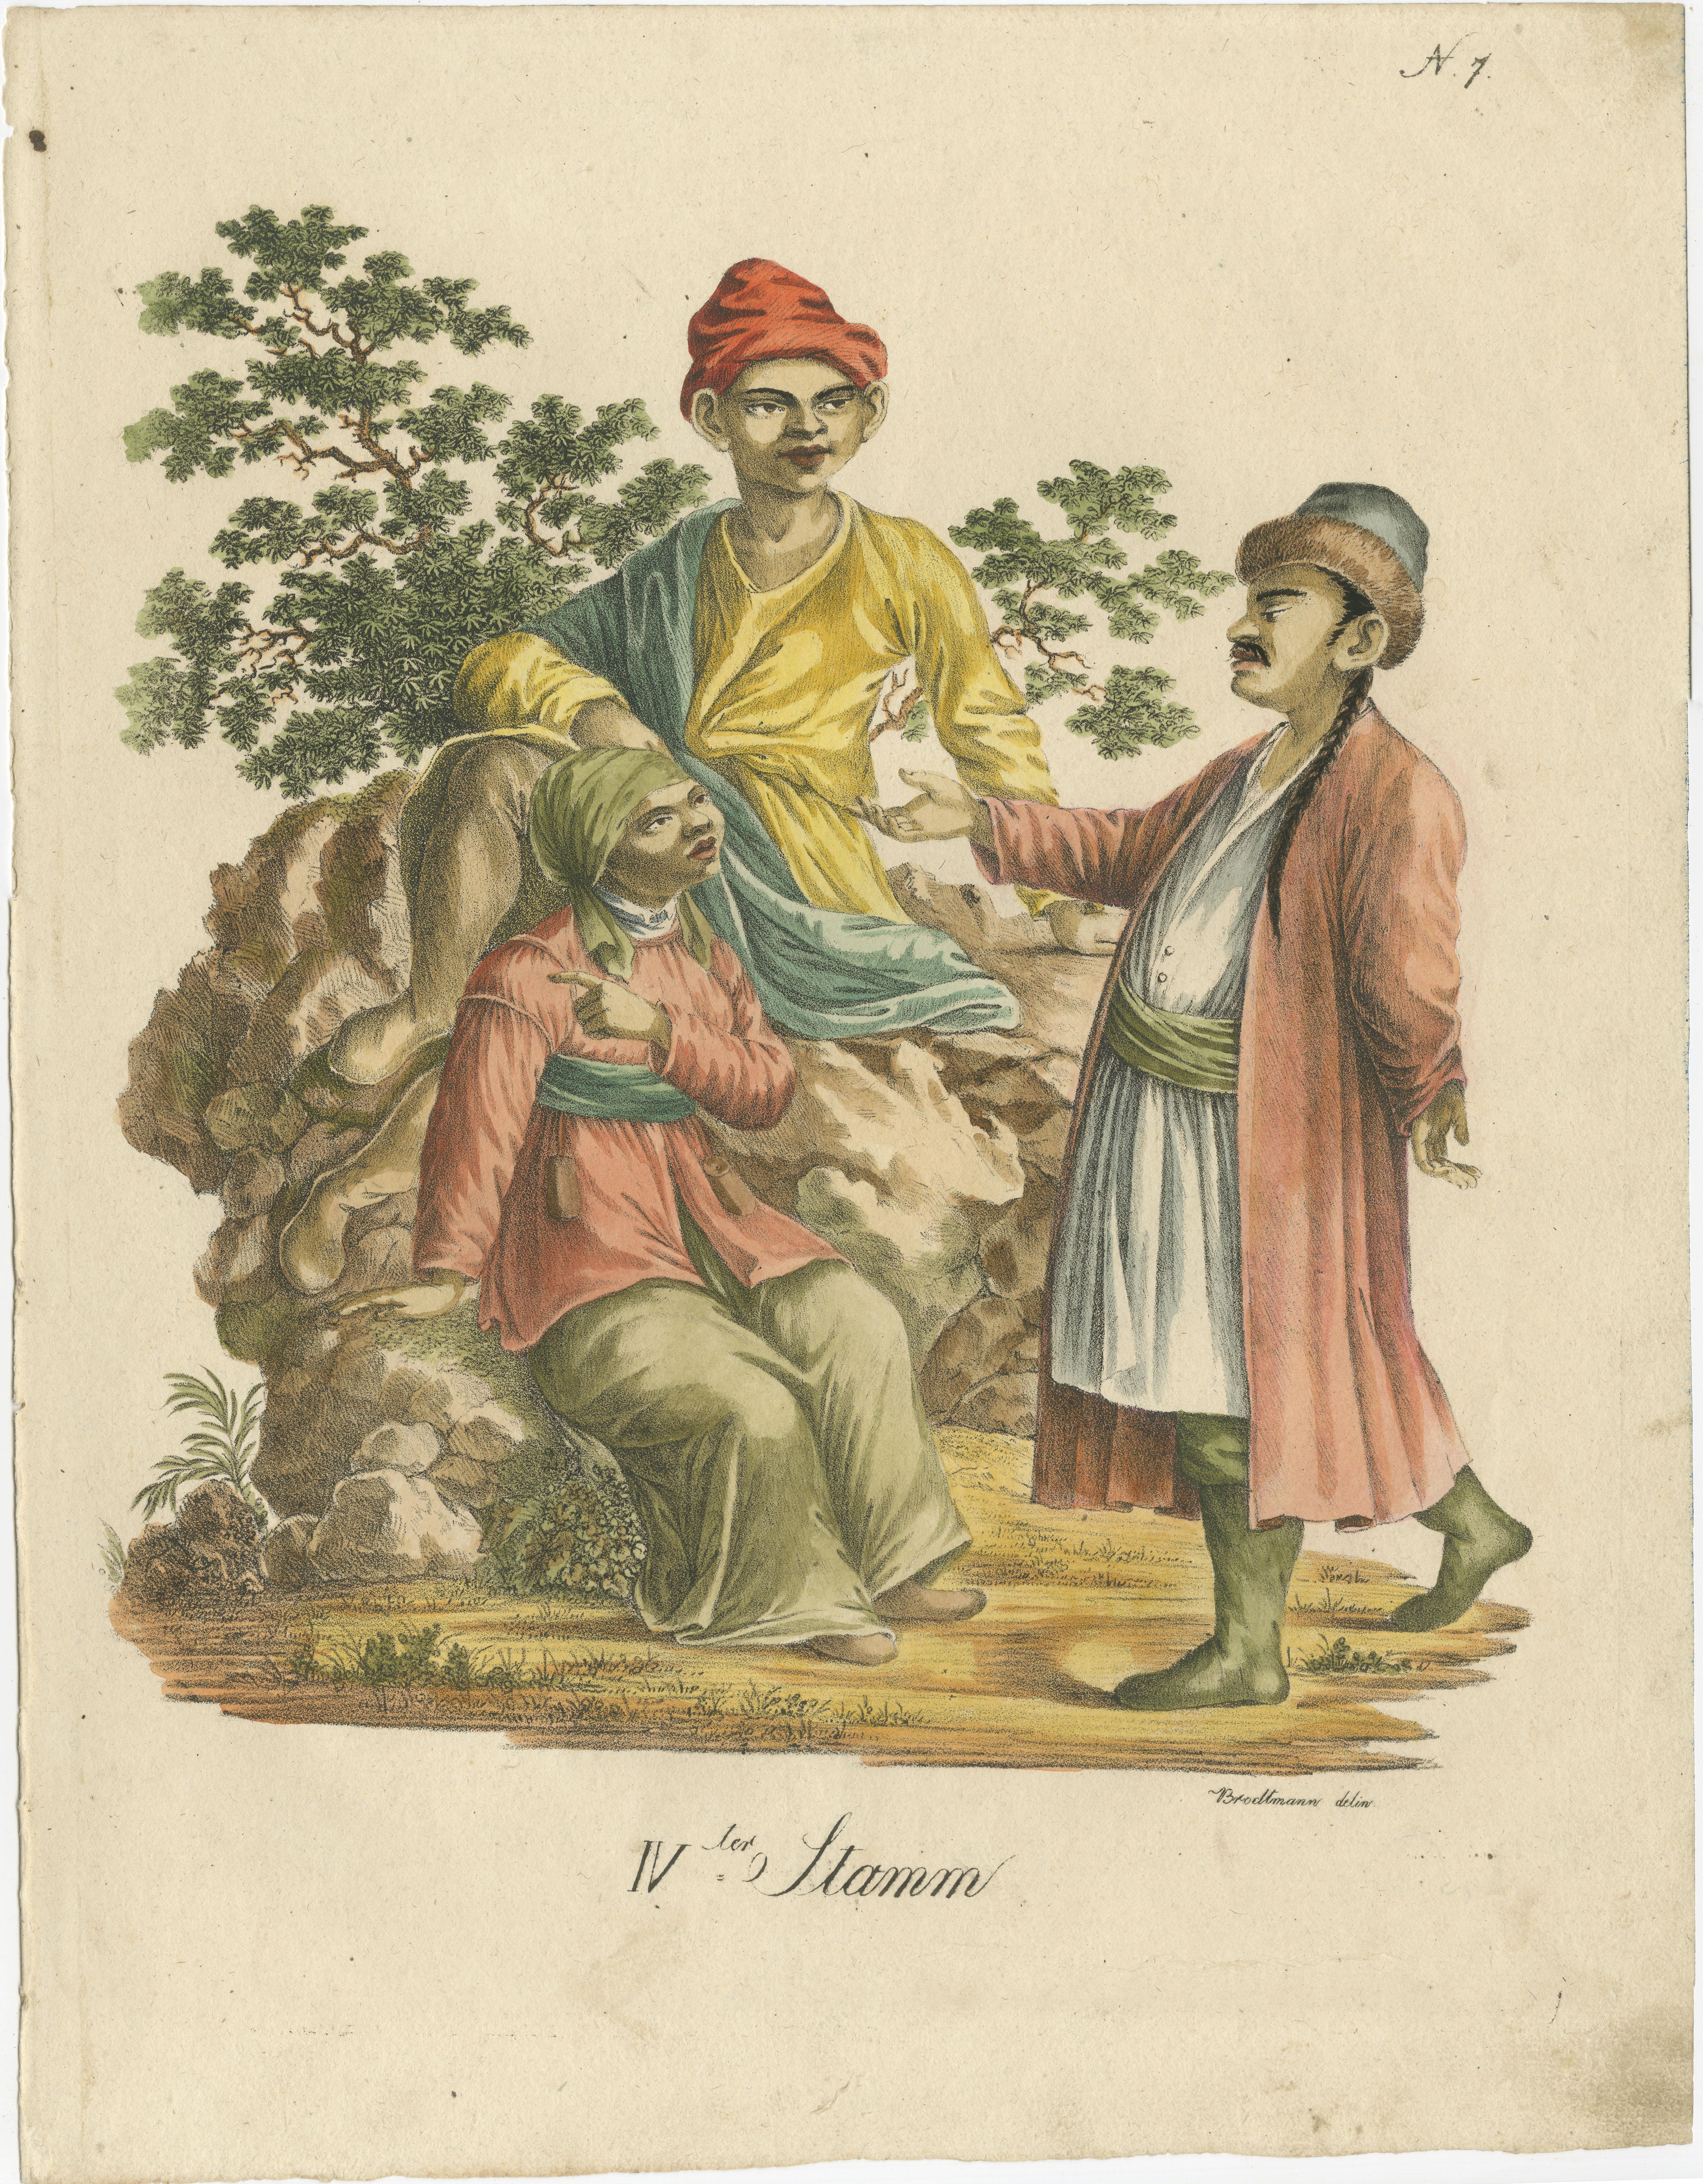 Antique print titled 'IVter Stamm'. Lithograph of a Kalmyk, Mongolic woman and Japanese. This print originates from 'Naturhistorische Bilder-Galerie' by Brodtmann. Published circa 1816. 